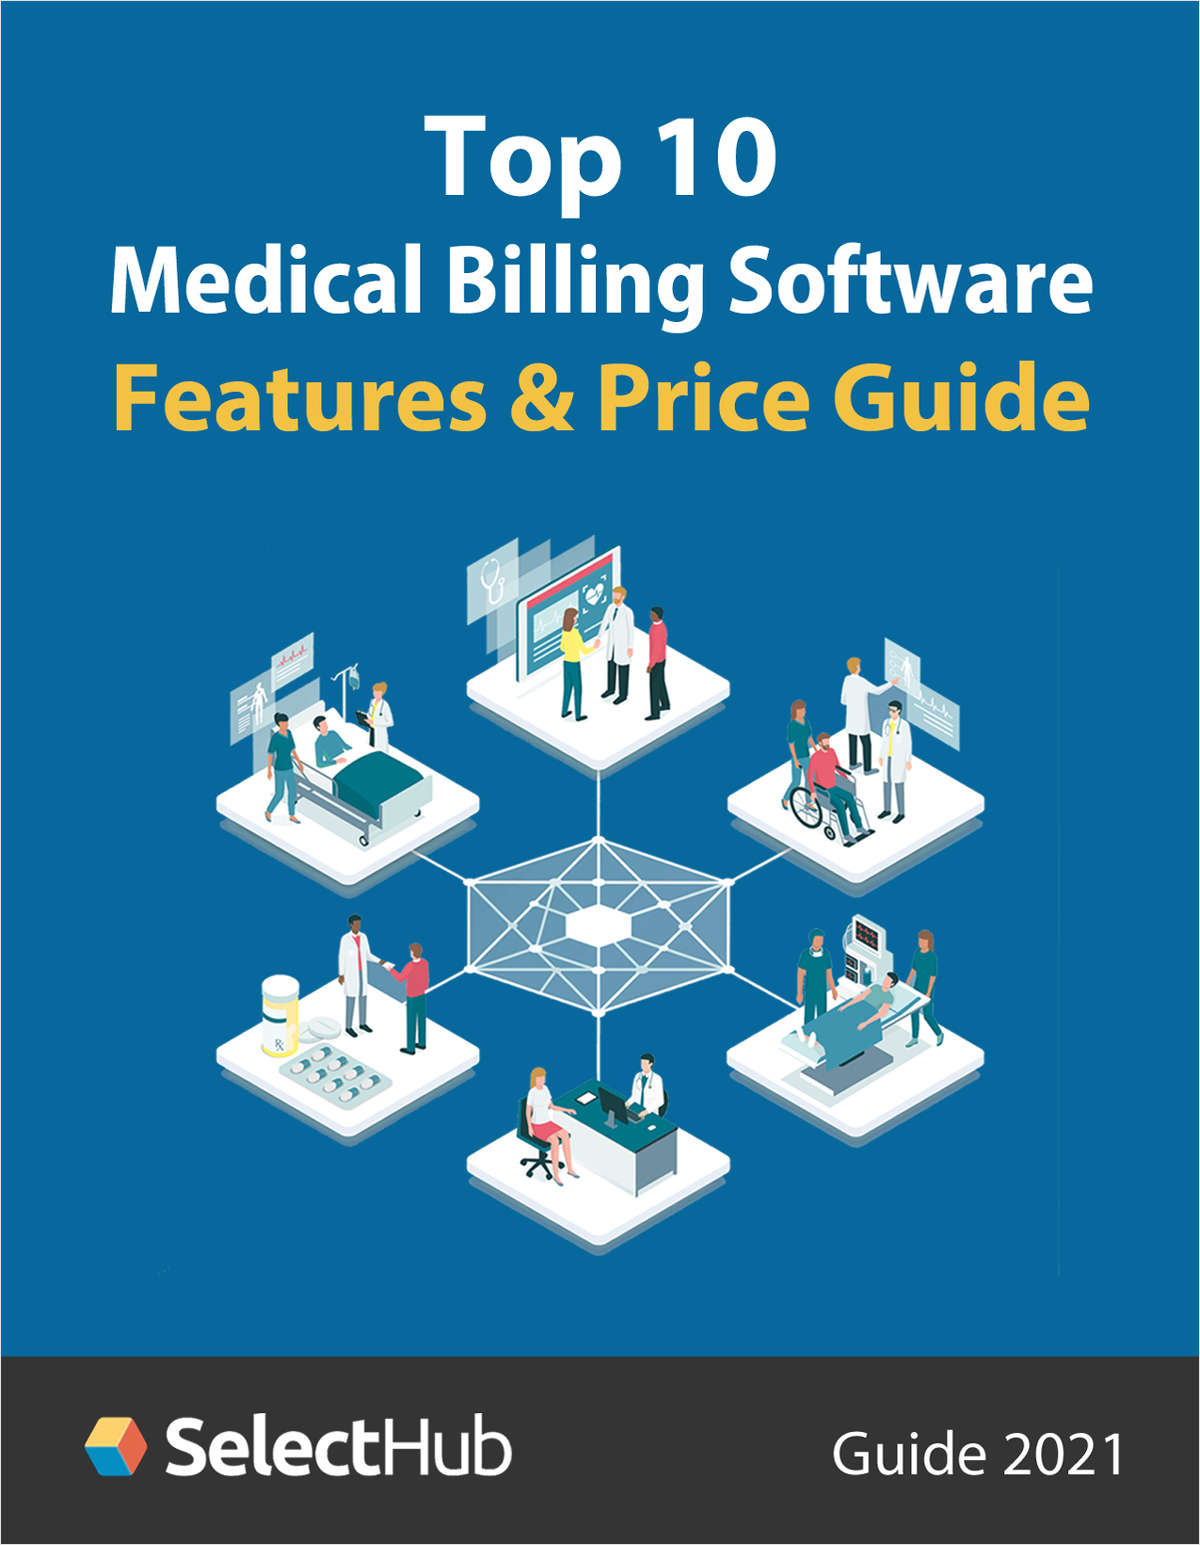 Top 10 Medical Billing Software Features & Price Guide 2021 Free Guide